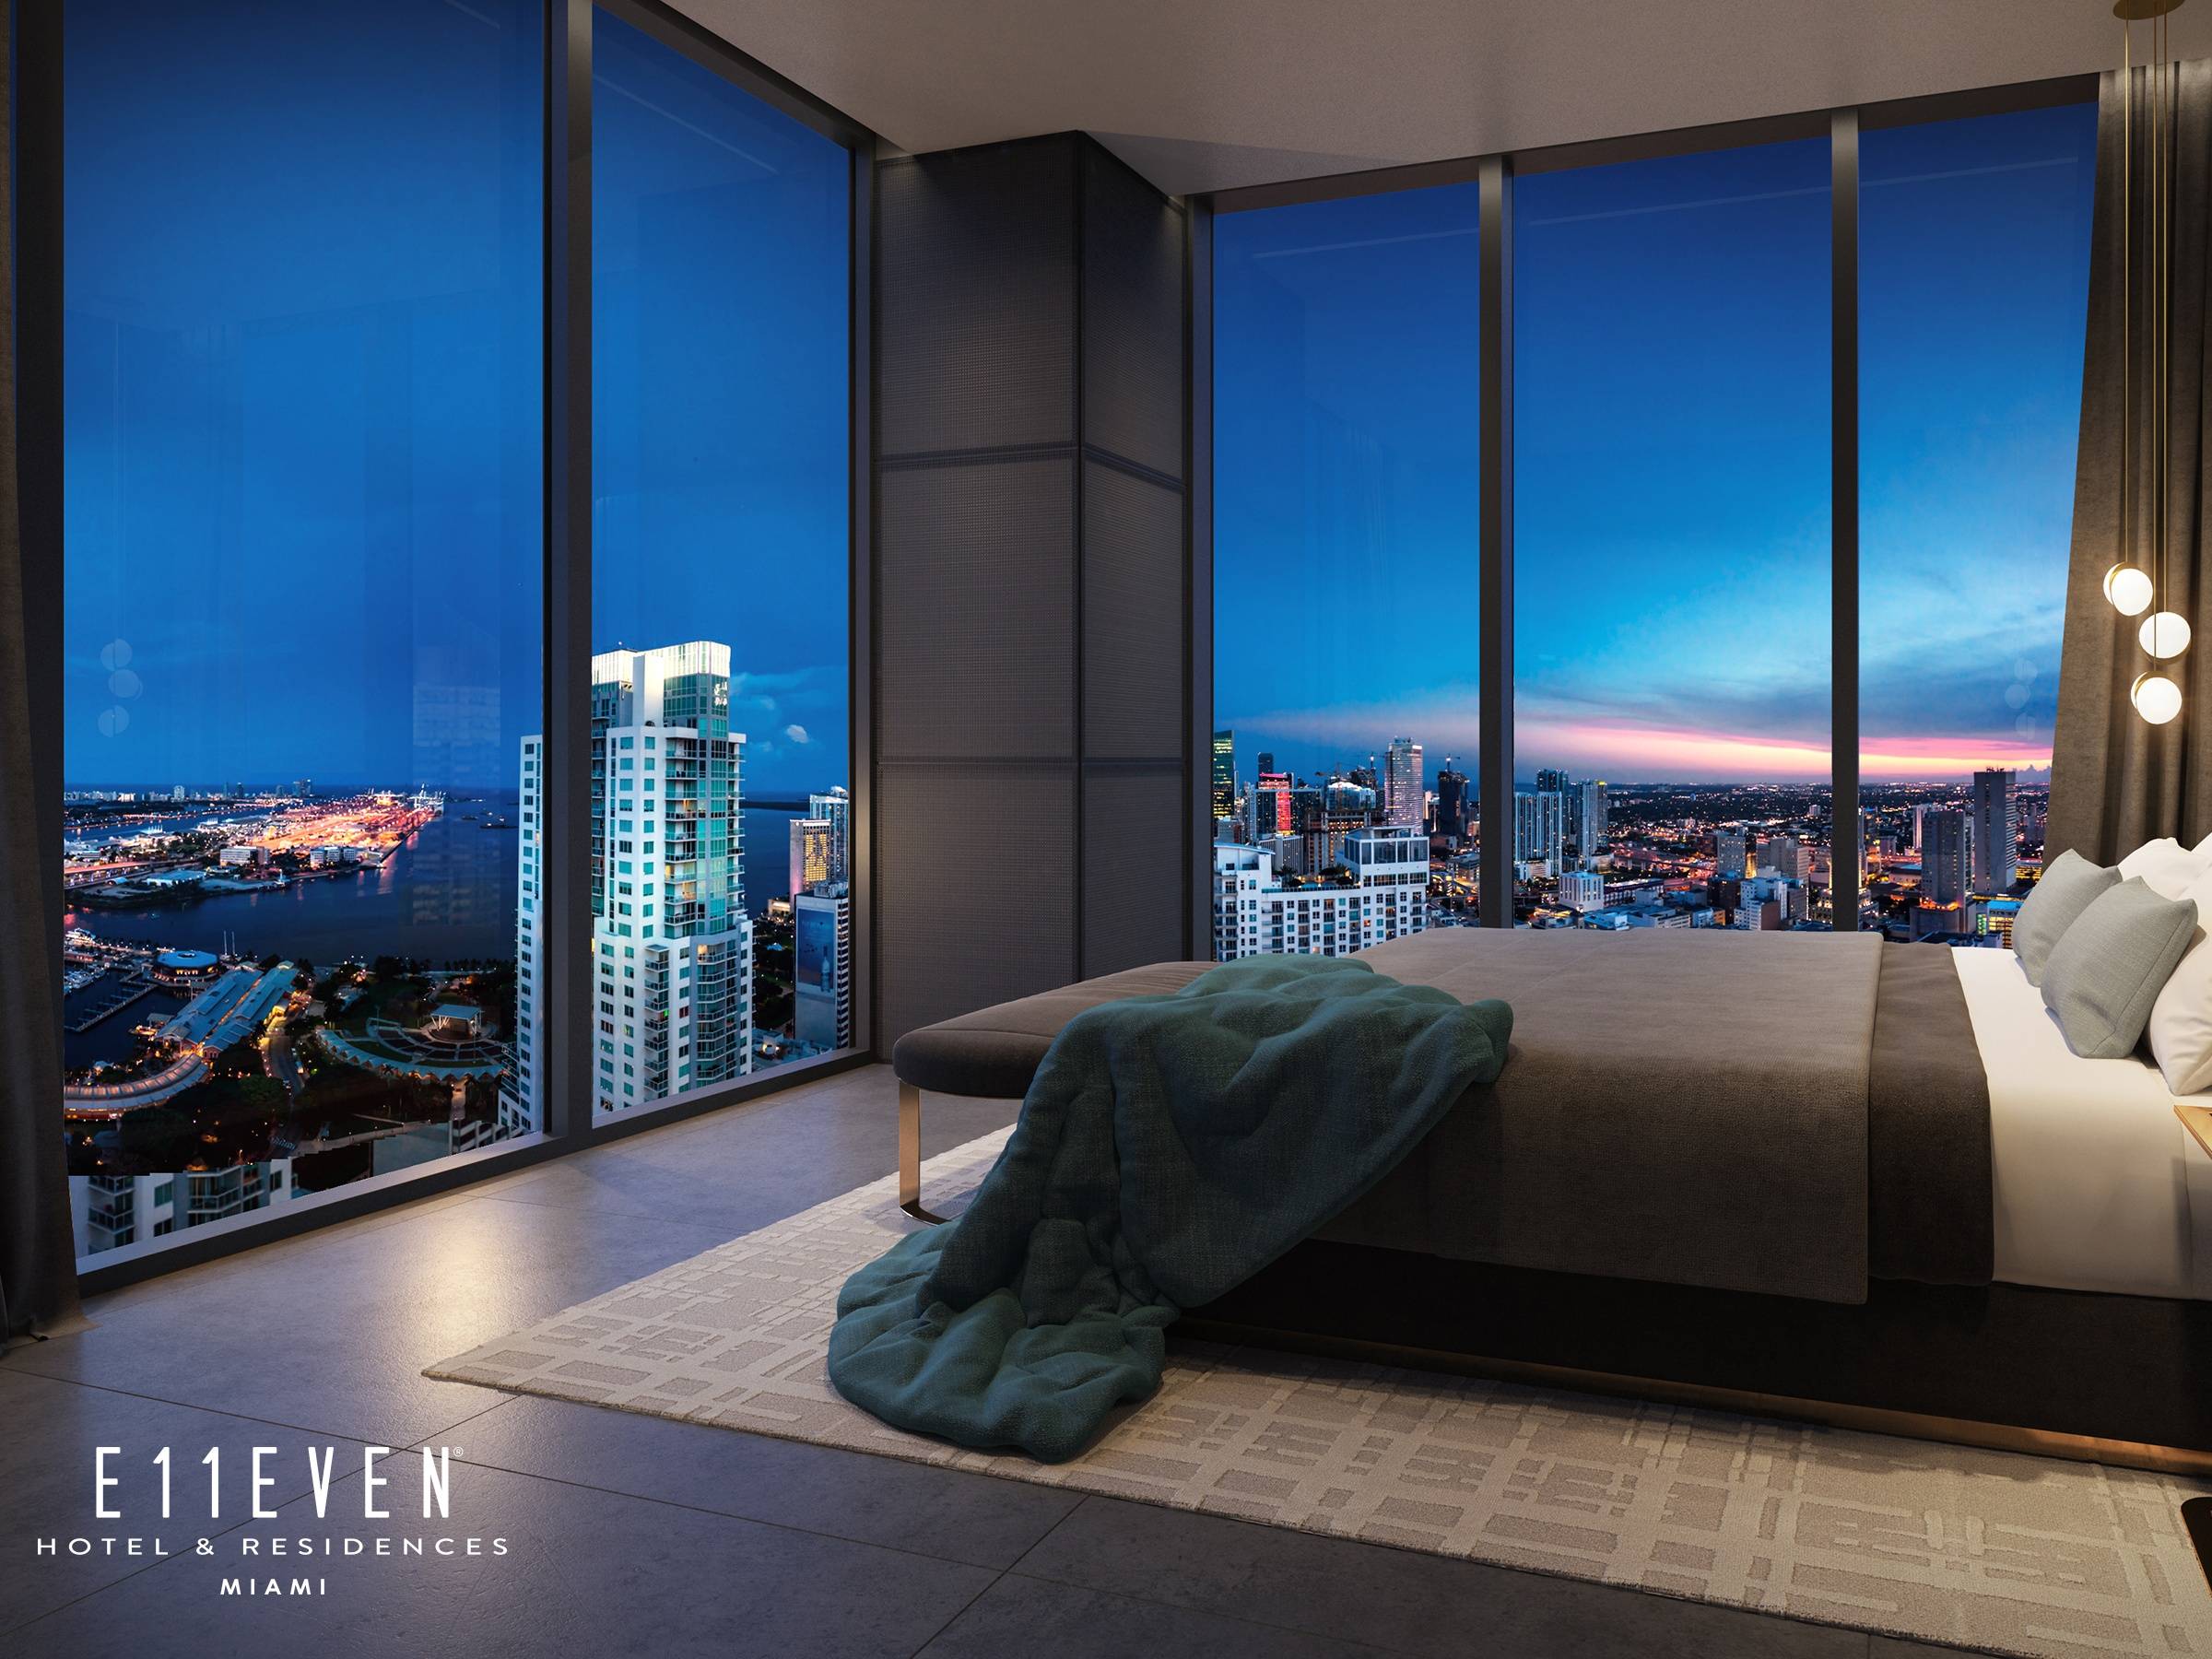 E11EVEN Hotel & Residences  | Presidential Suite 62nd Floor| 2BED + 2.5BATH + Private Pool | 3272 SQFT